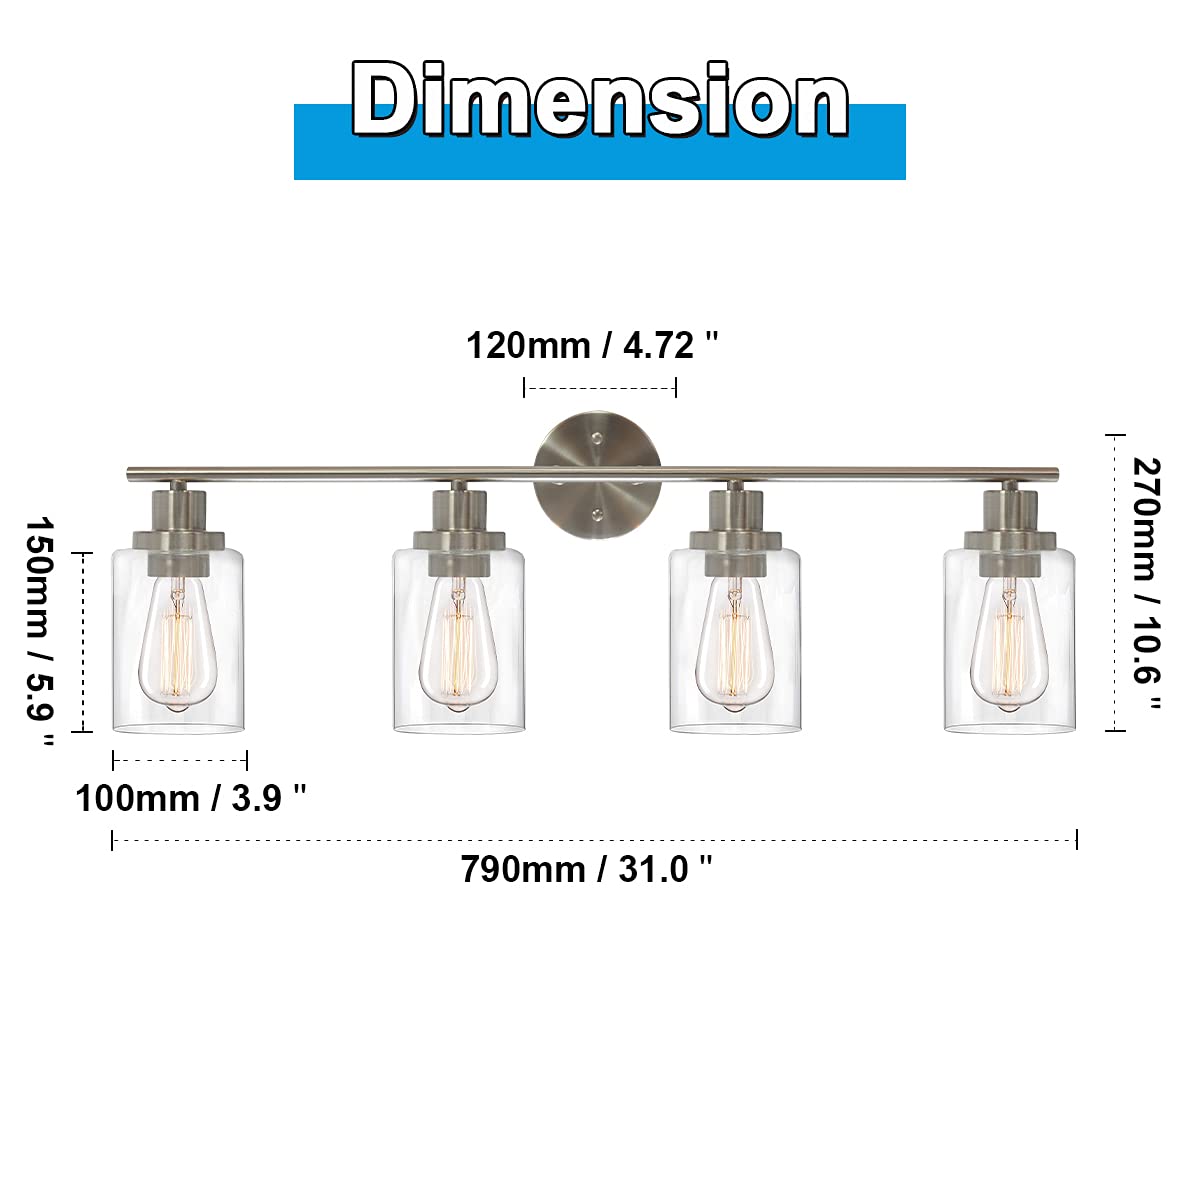 LauxaL Bathroom Lights Brushed Nickel 4 Light Modern Vanity Lighting with Glass Shade, Industrial Vintage Bath Porch Wall Light Fixture Farmhouse Wall Lamp for Kitchen Dining Room Living Room Mirror